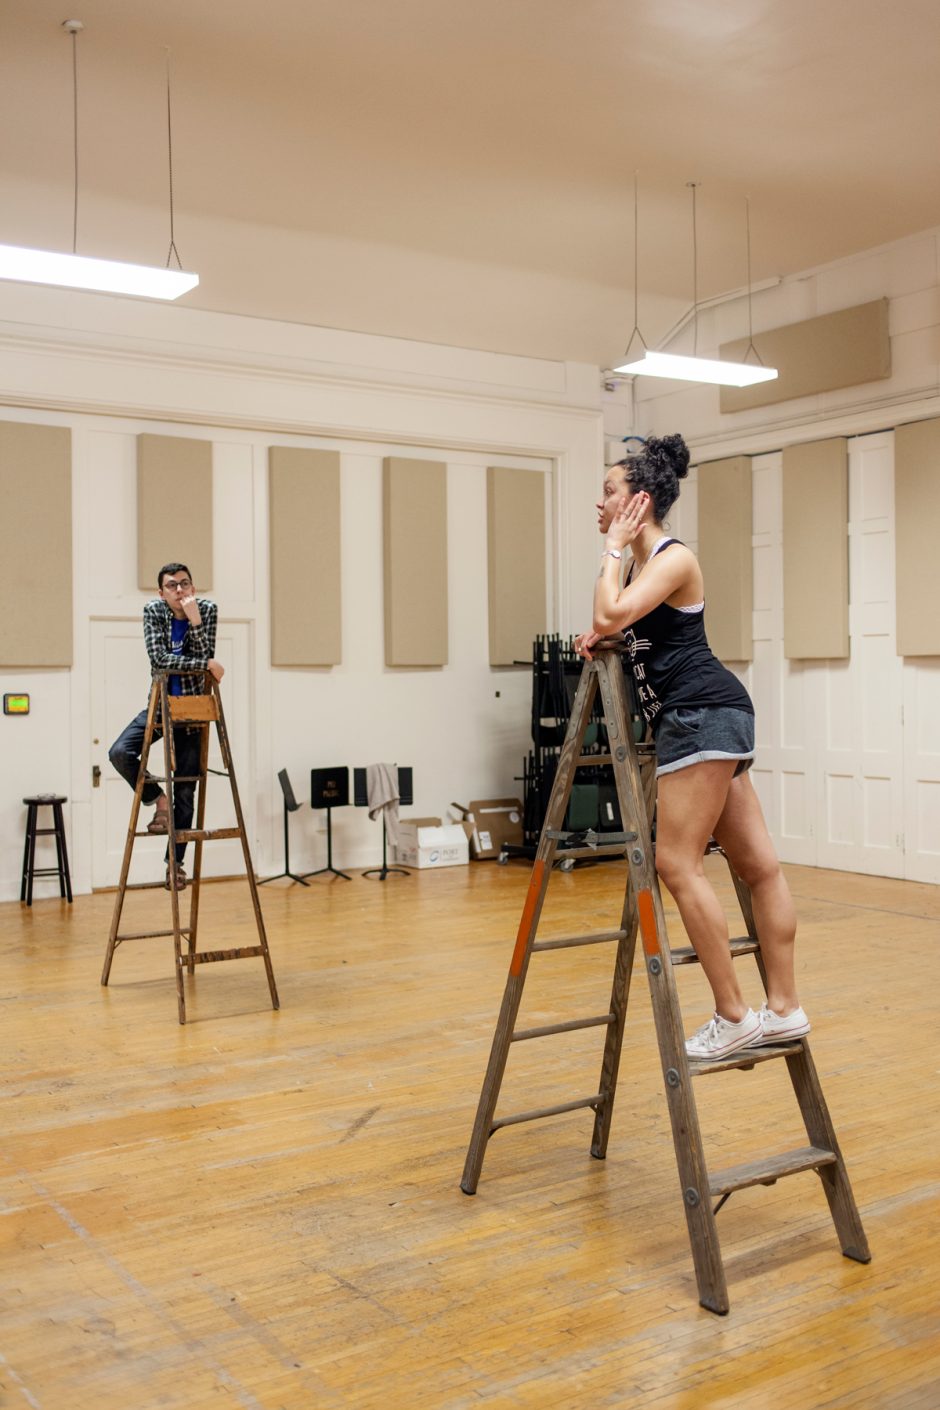 Students standing on ladders in a rehearsal studio.